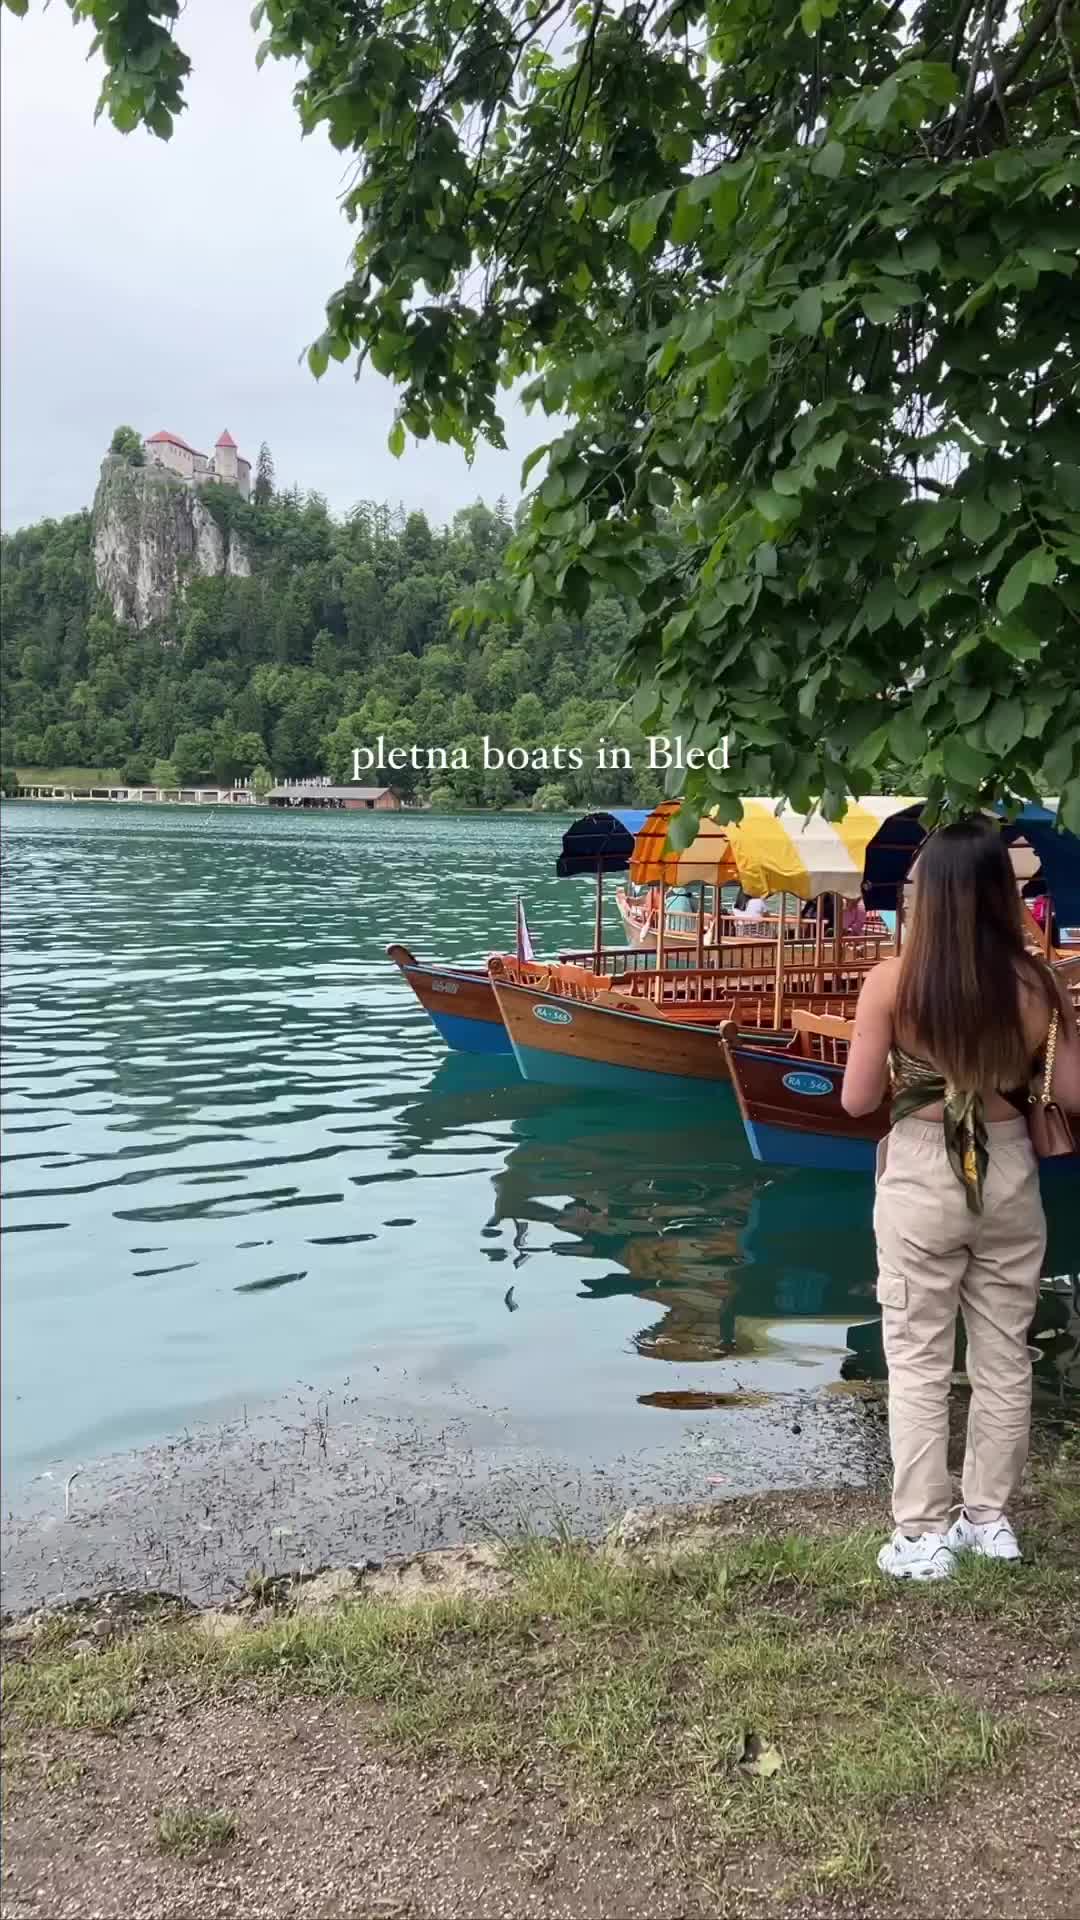 Fascinated by Pletna Boats on Lake Bled, Slovenia